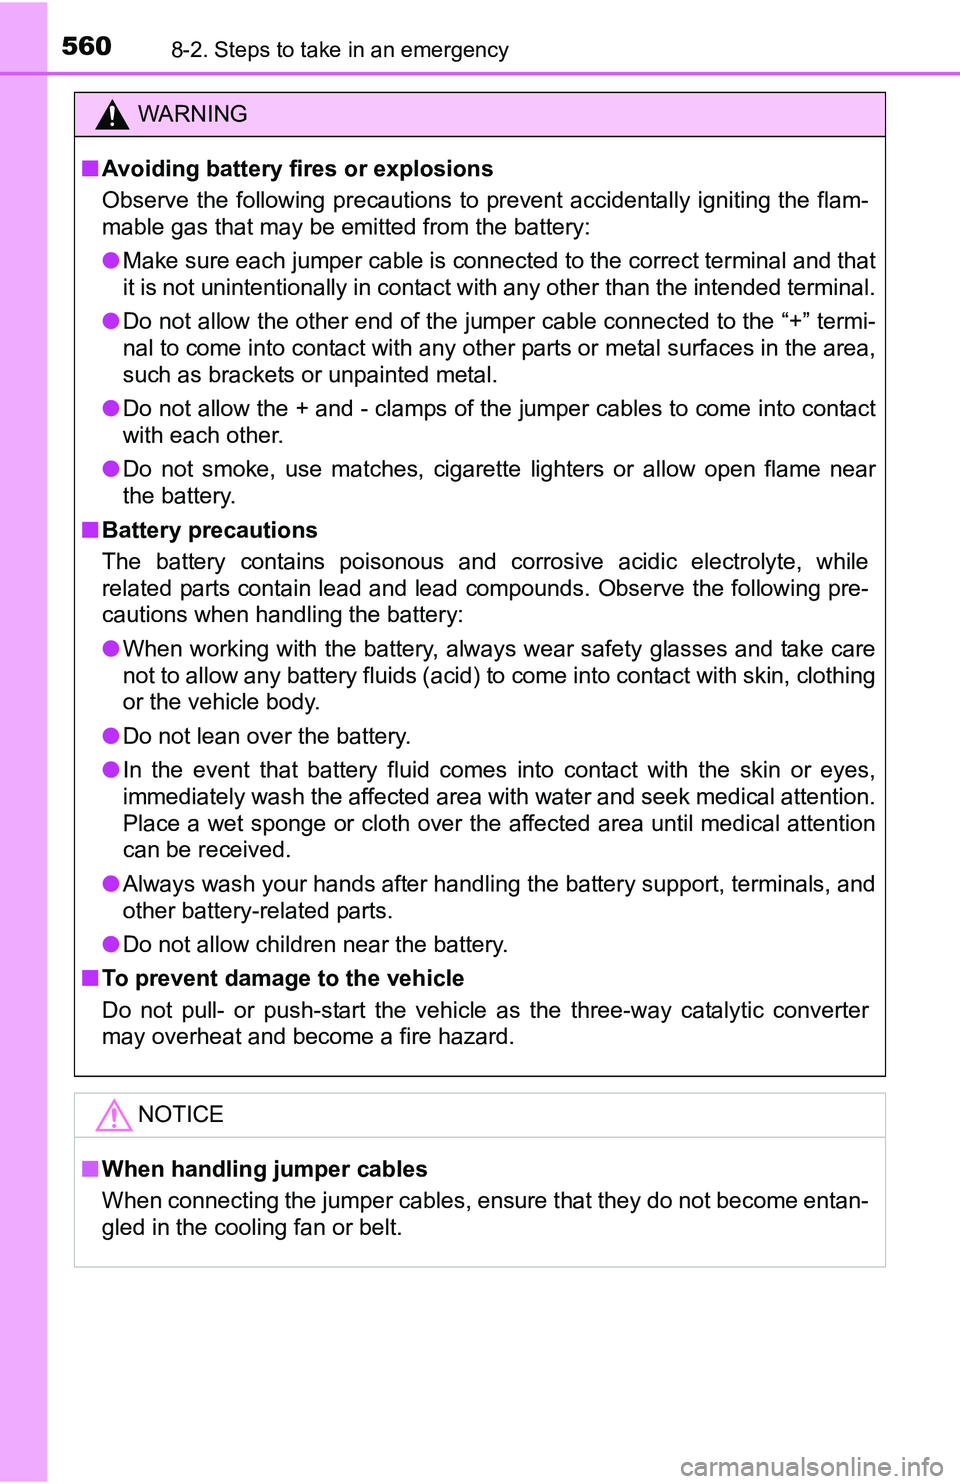 TOYOTA TACOMA 2016  Owners Manual (in English) 5608-2. Steps to take in an emergency
WARNING
■Avoiding battery fires or explosions
Observe the following precautions to prevent accidentally igniting the flam-
mable gas that may be emitted from th